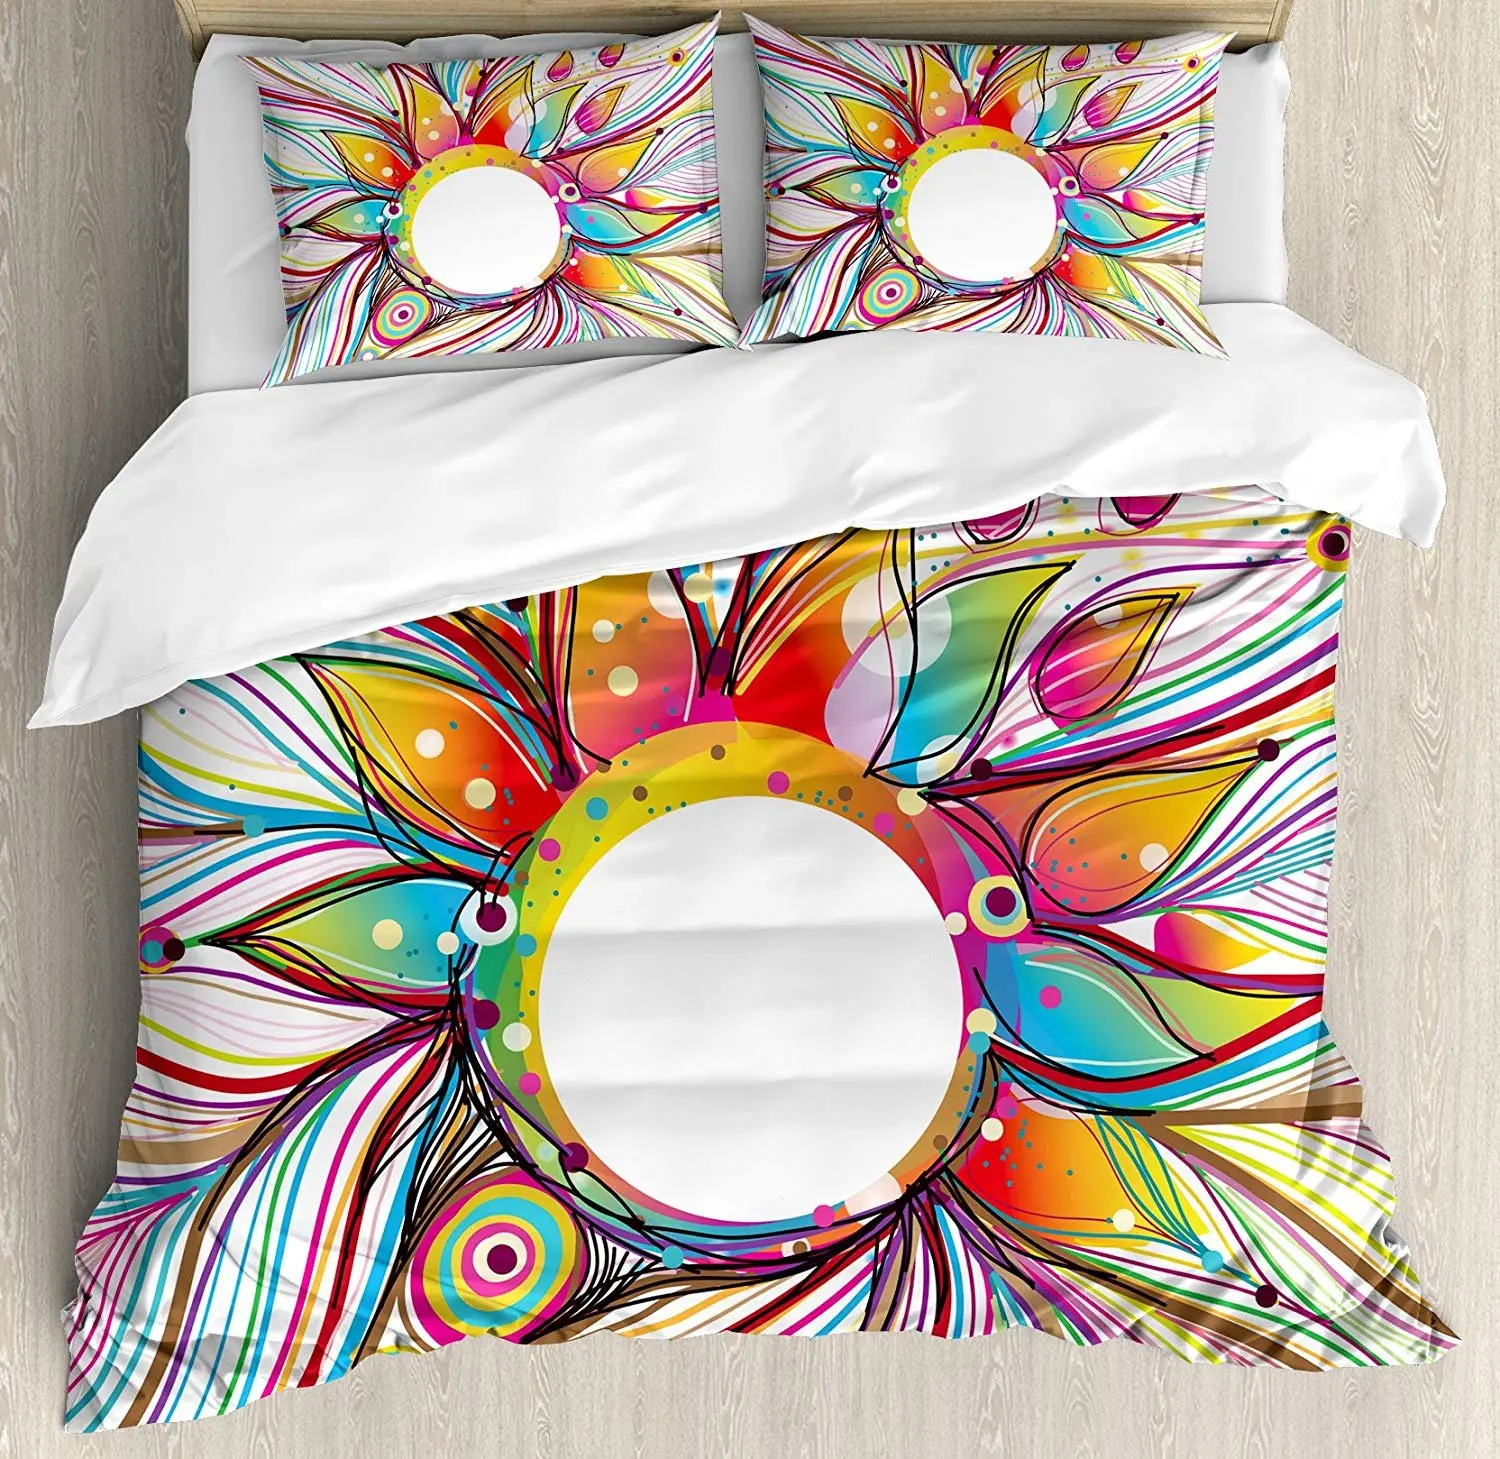 

Abstract Bedding Set Absurd Vector Smoky Wavy Floral Design with Rainbow alike Stripes and Lines Print Duvet Cover Pillowcase